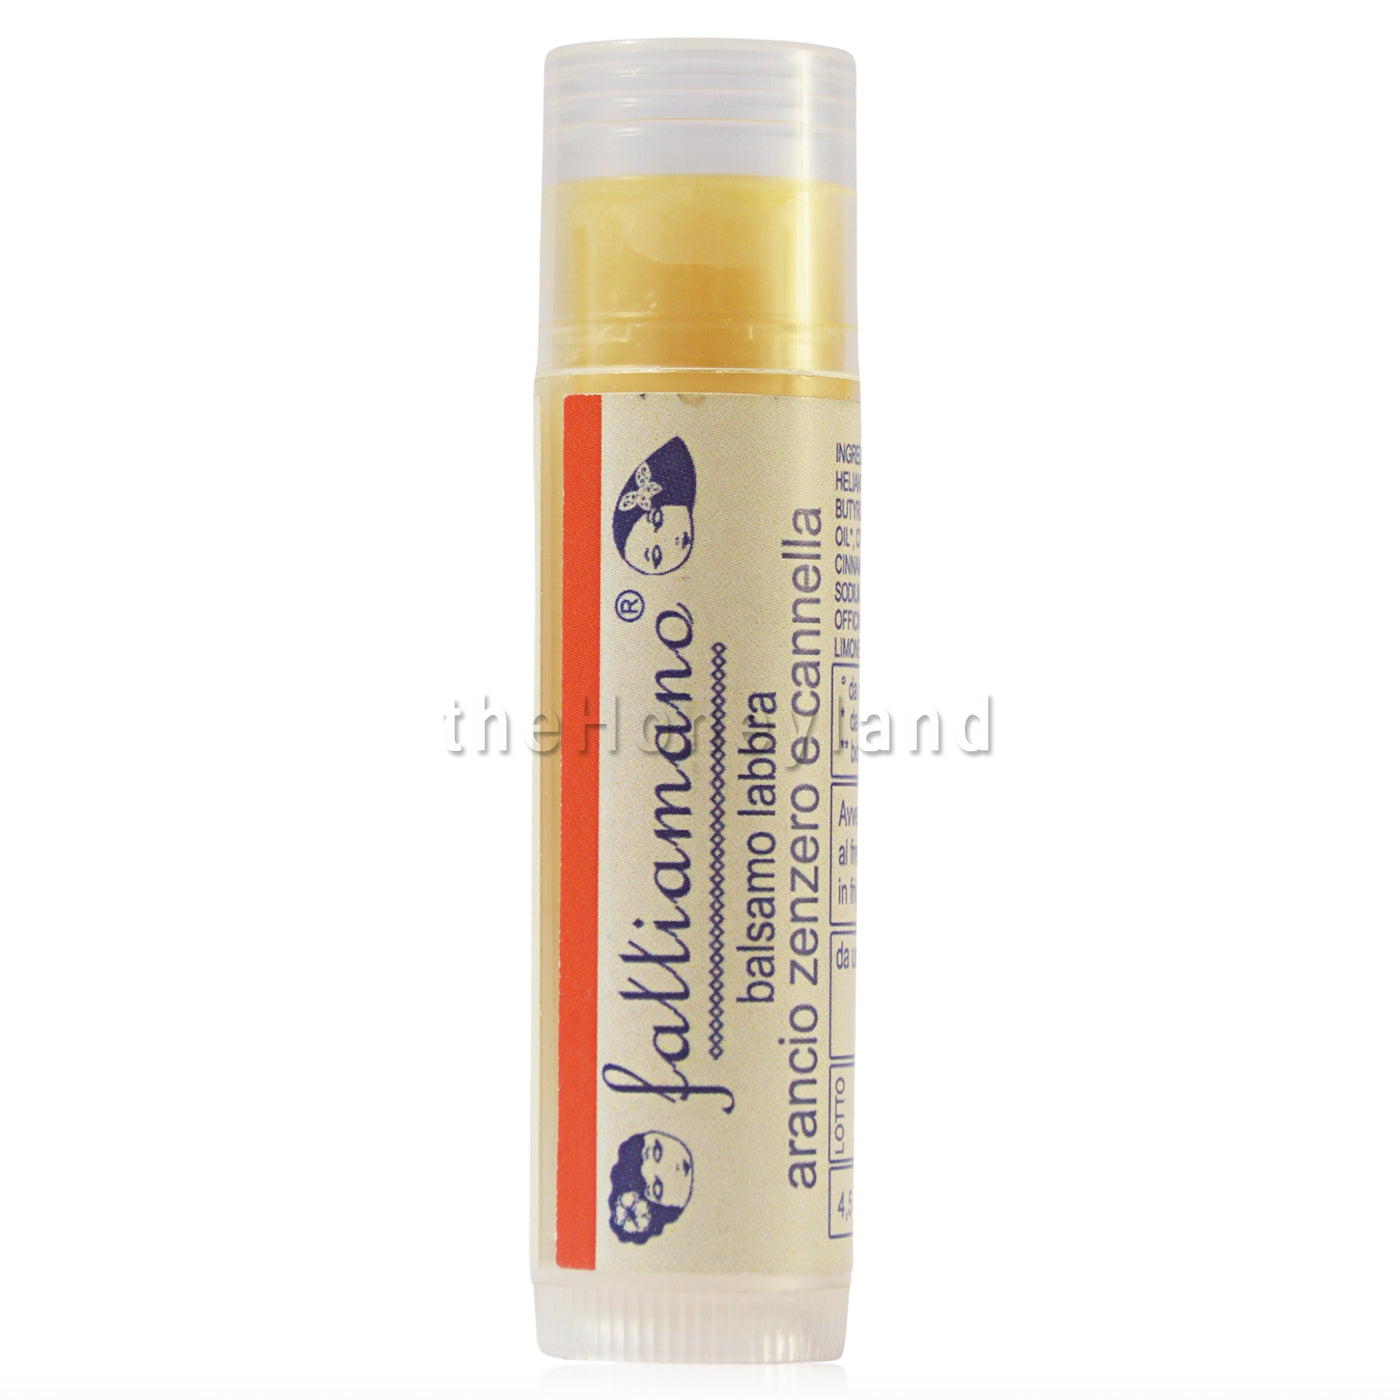 Ginger Lip balm with organic beeswax